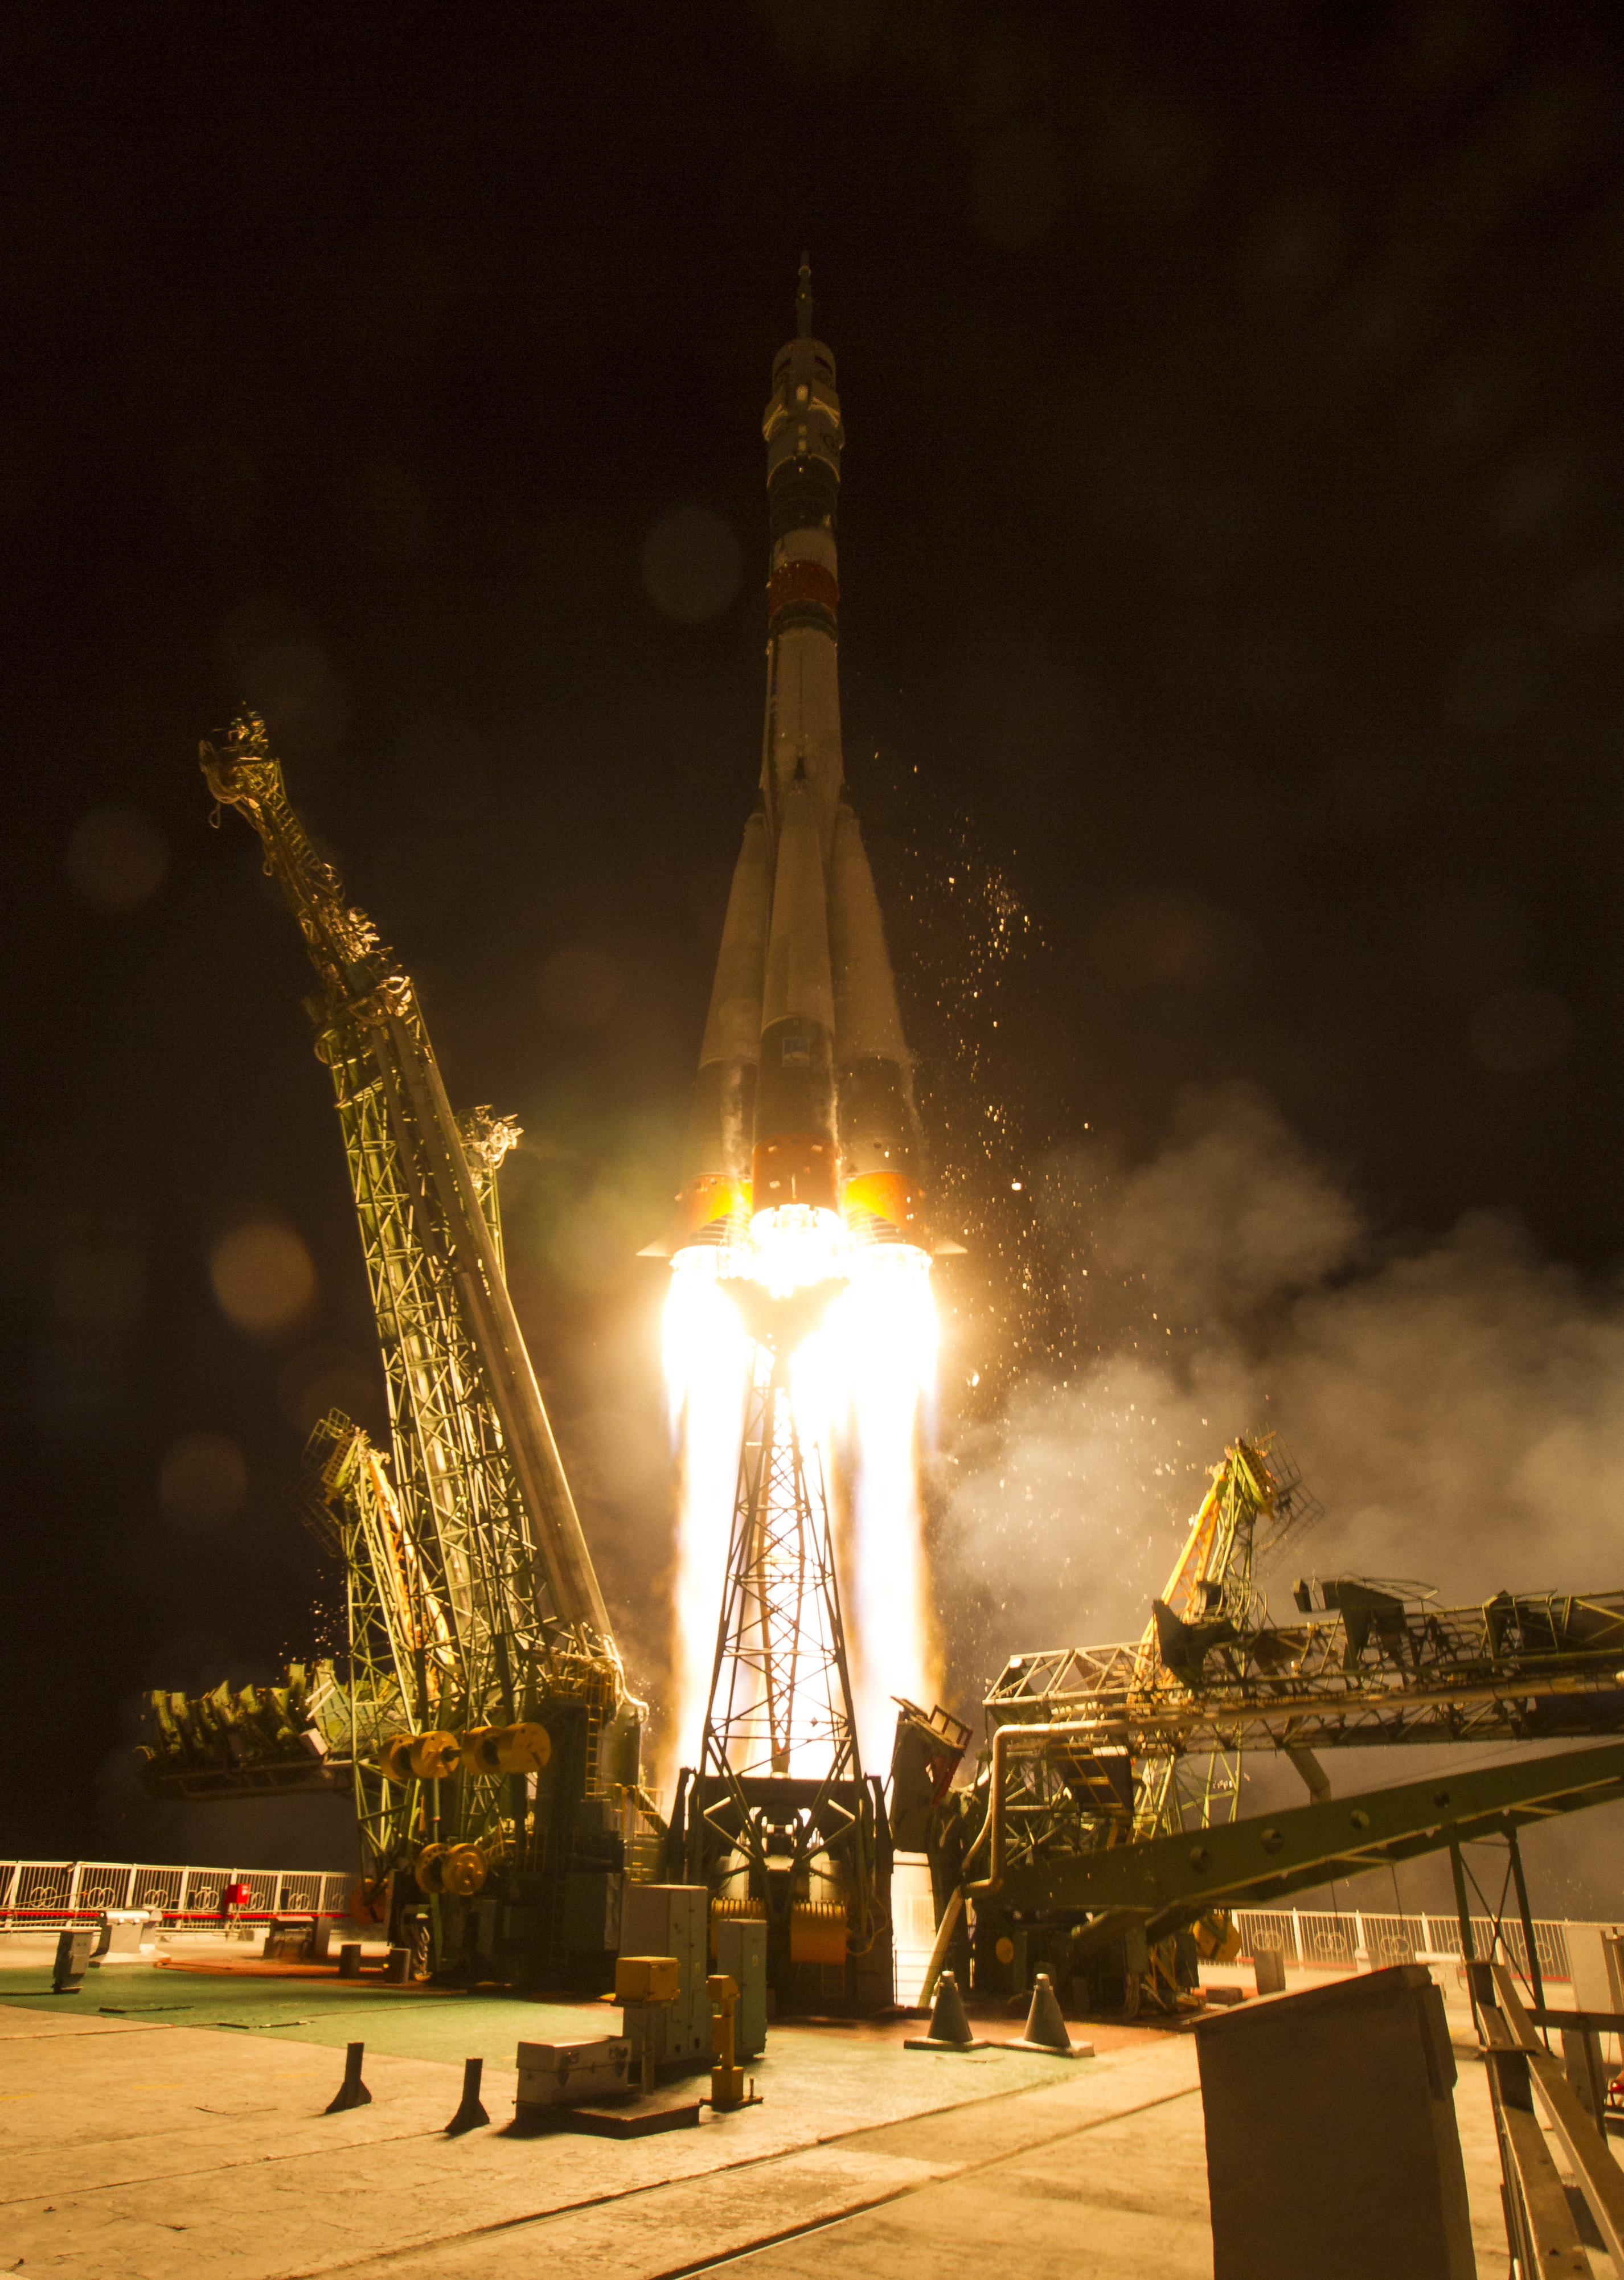 Expedition 52 Soyuz Launches to the Space Station | NASA